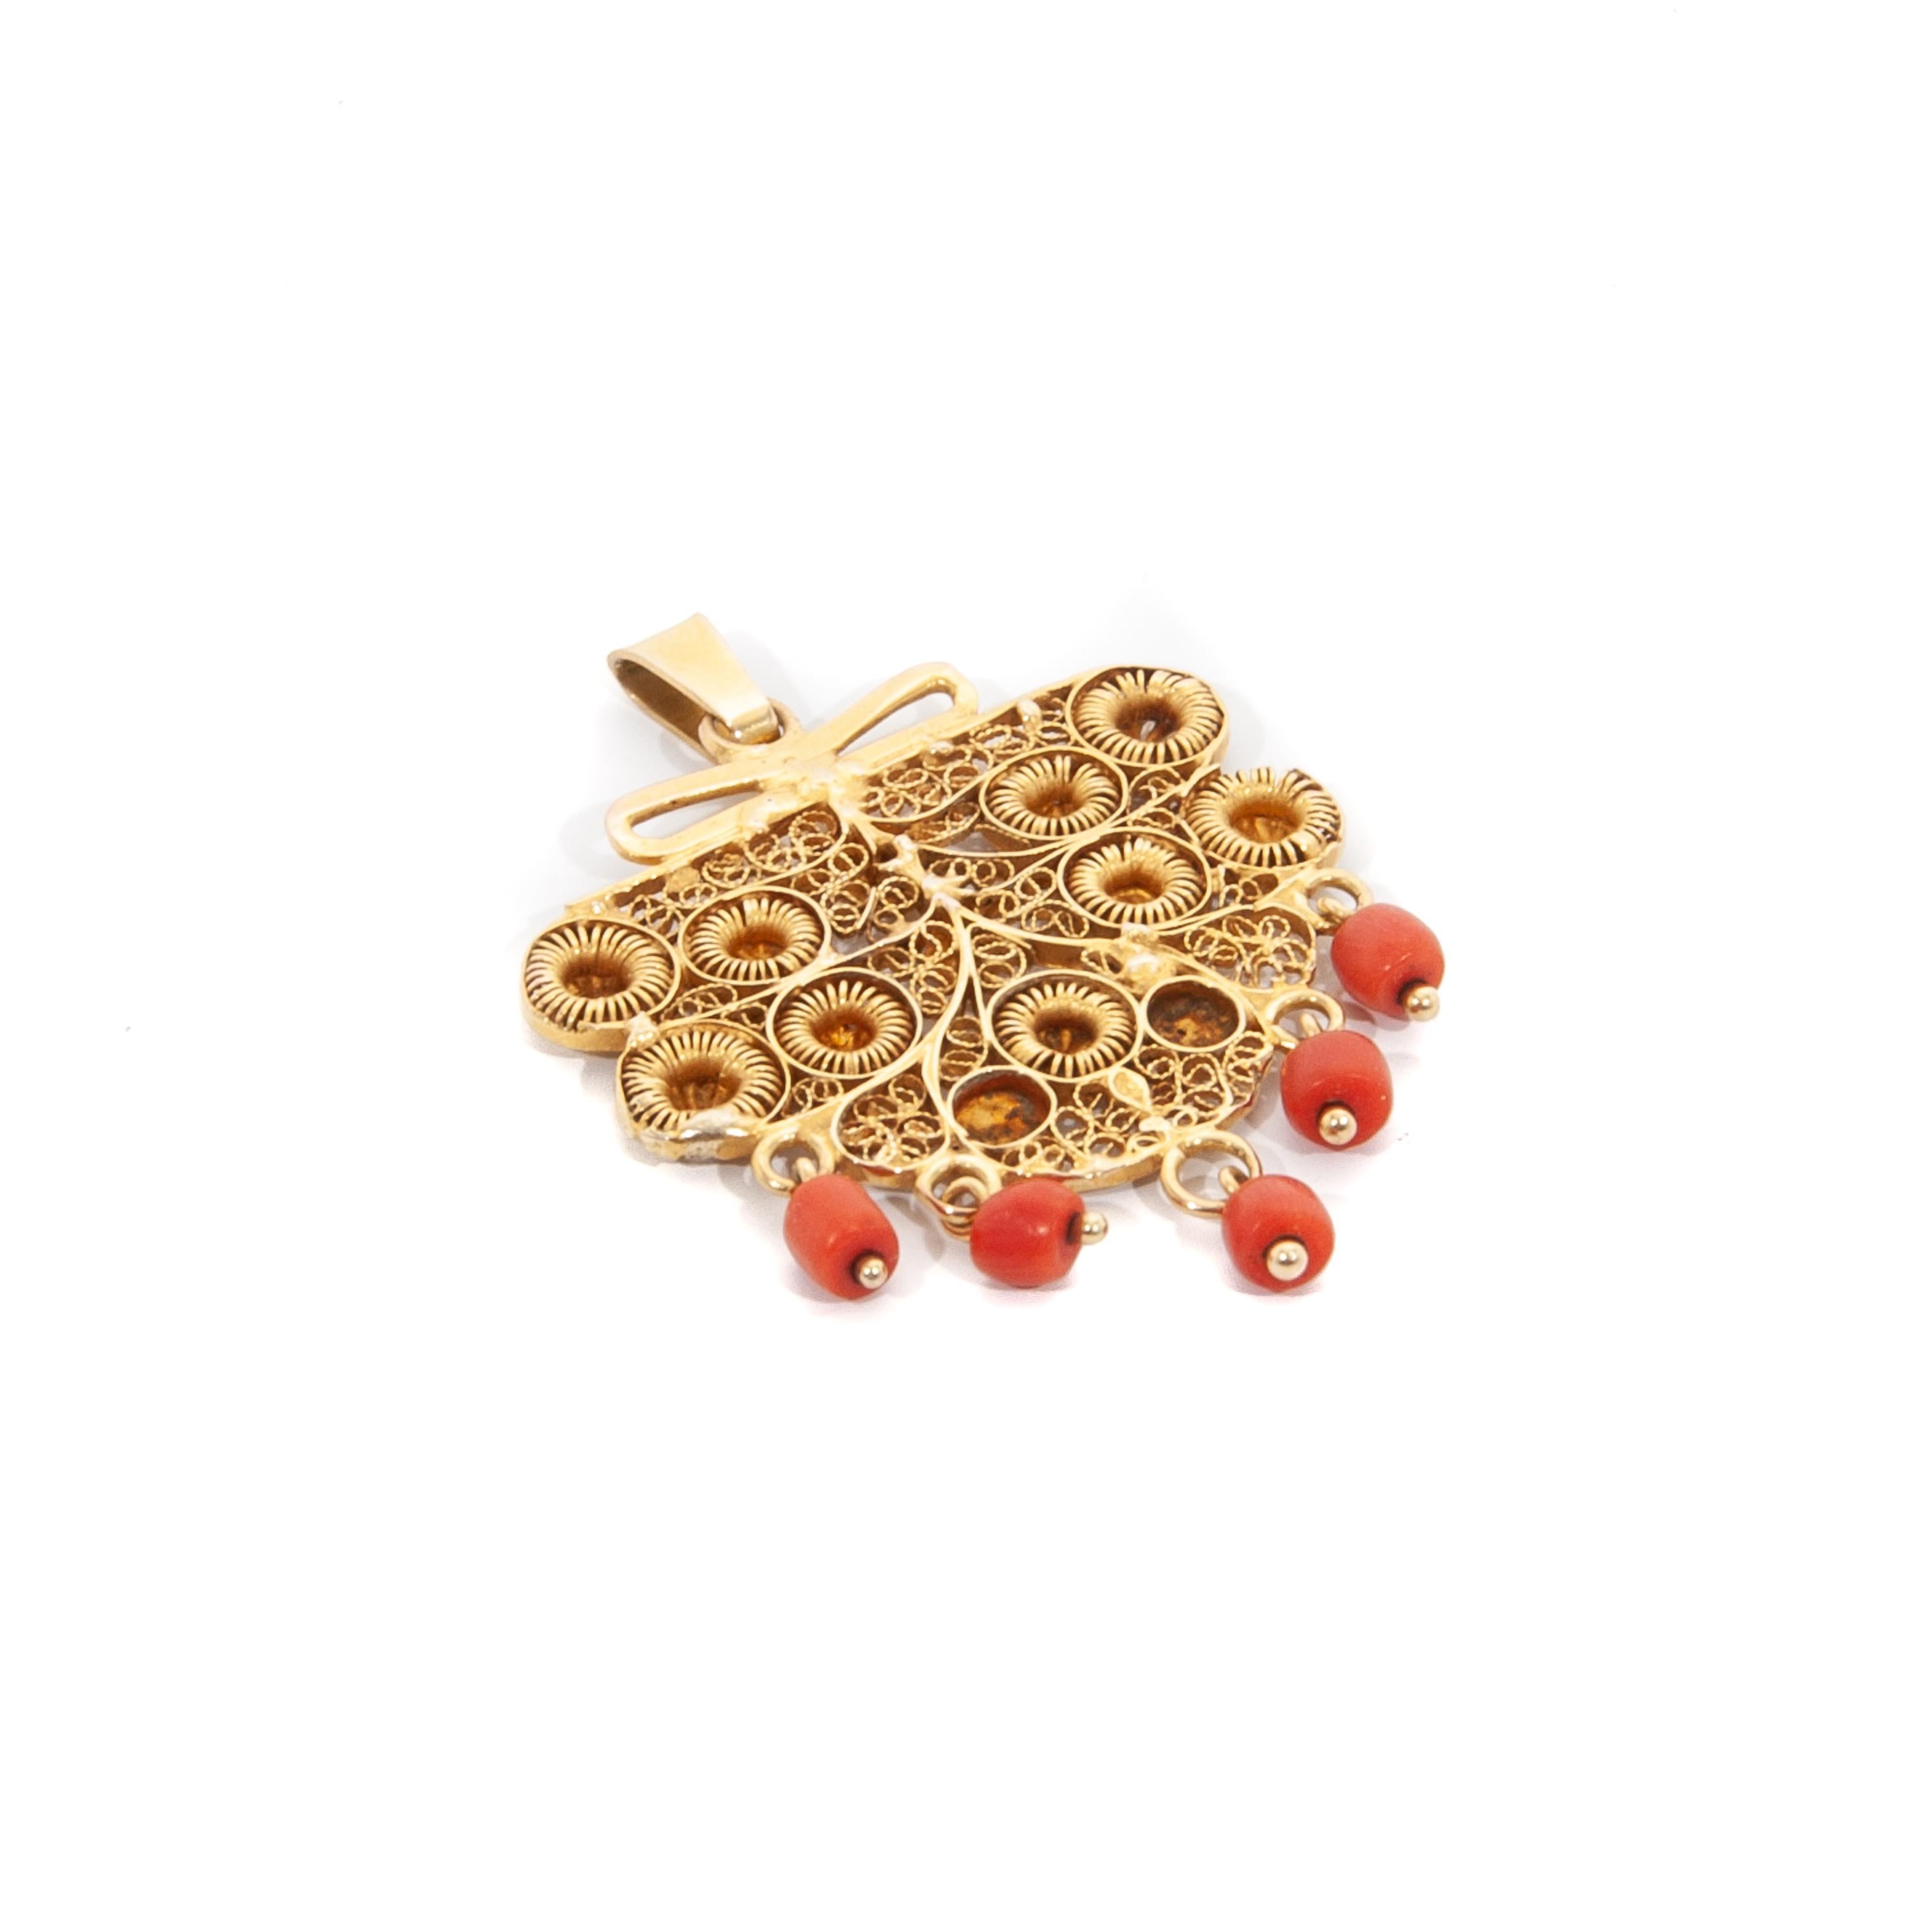 Bead Antique Coral and Filigree 14K Gold Pendant For Sale